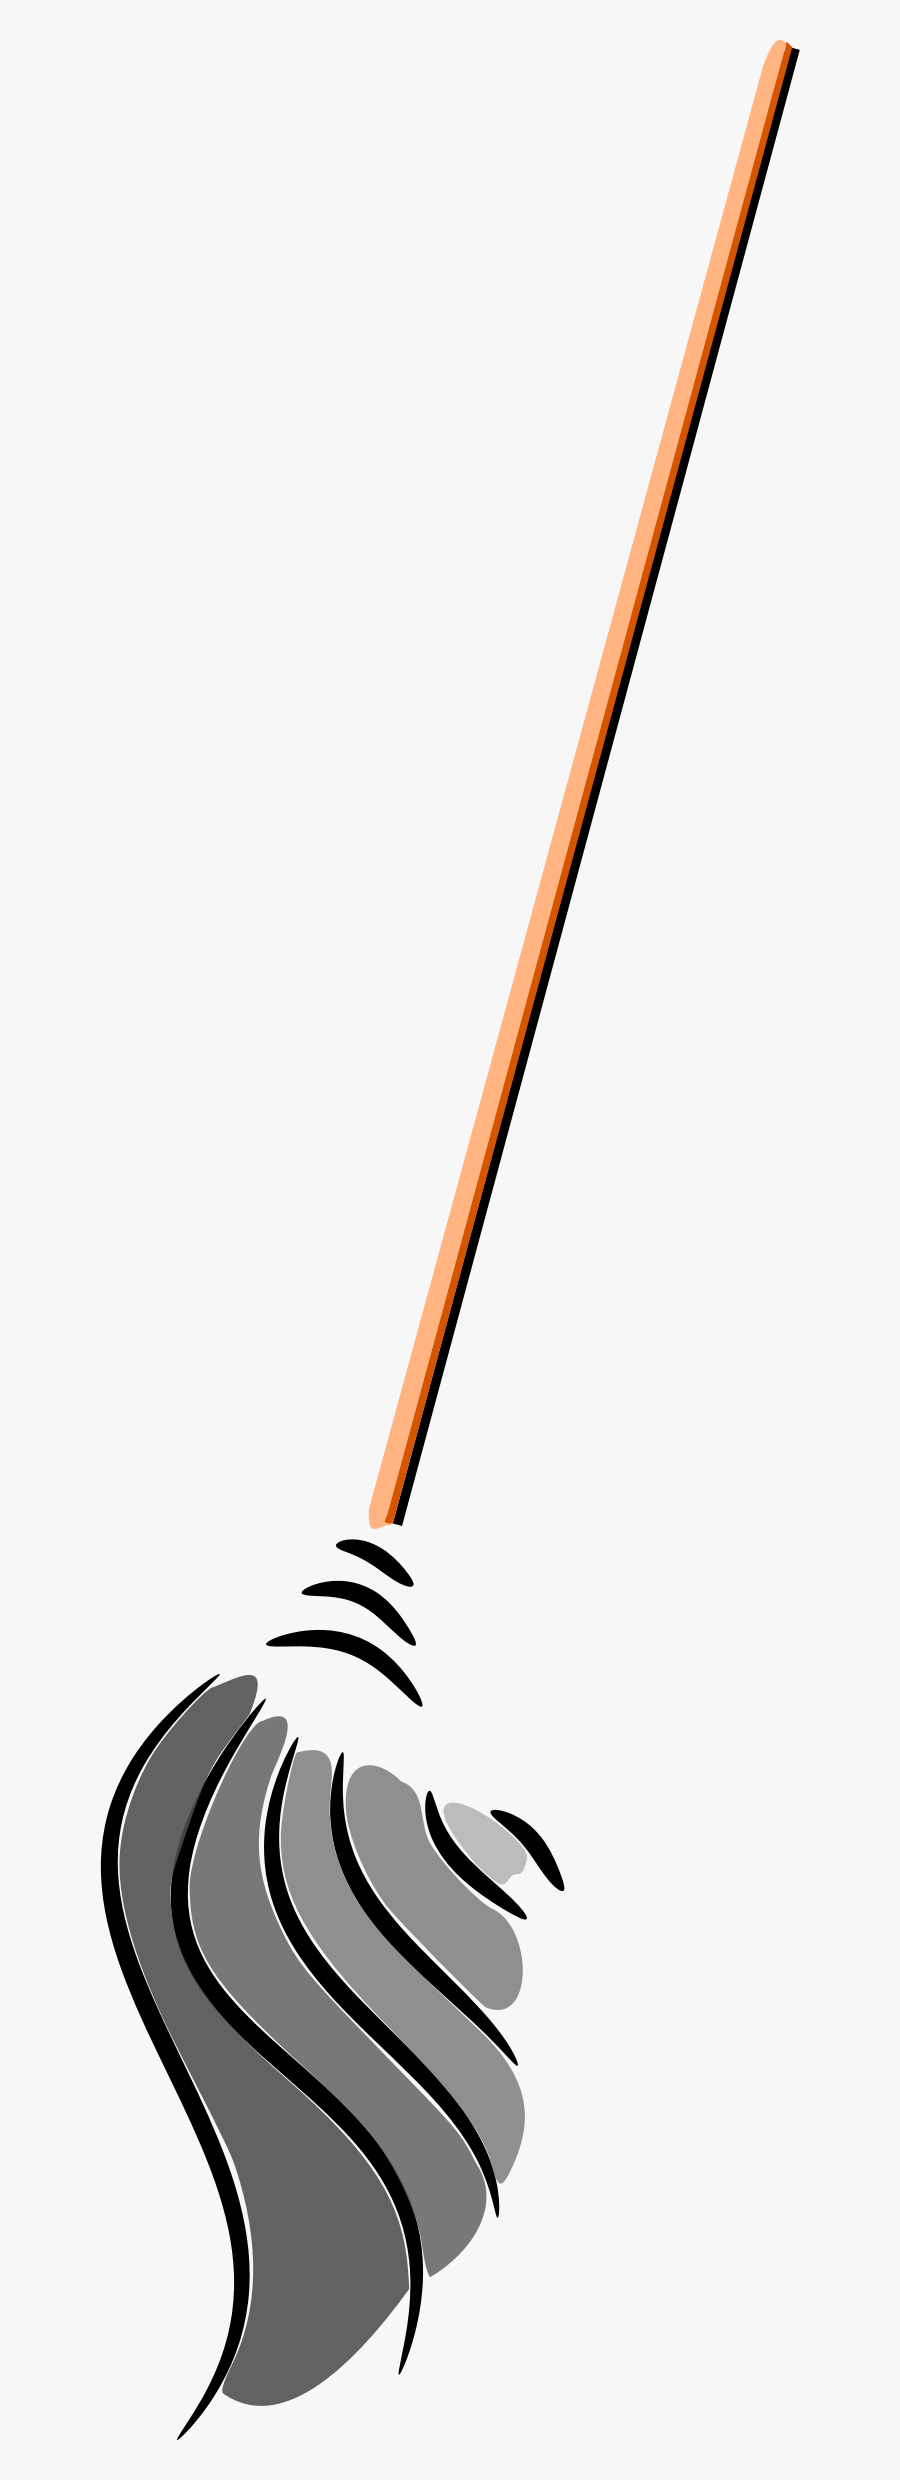 Mop Clipart Clip Art - Broom And Bucket Background, Transparent Clipart